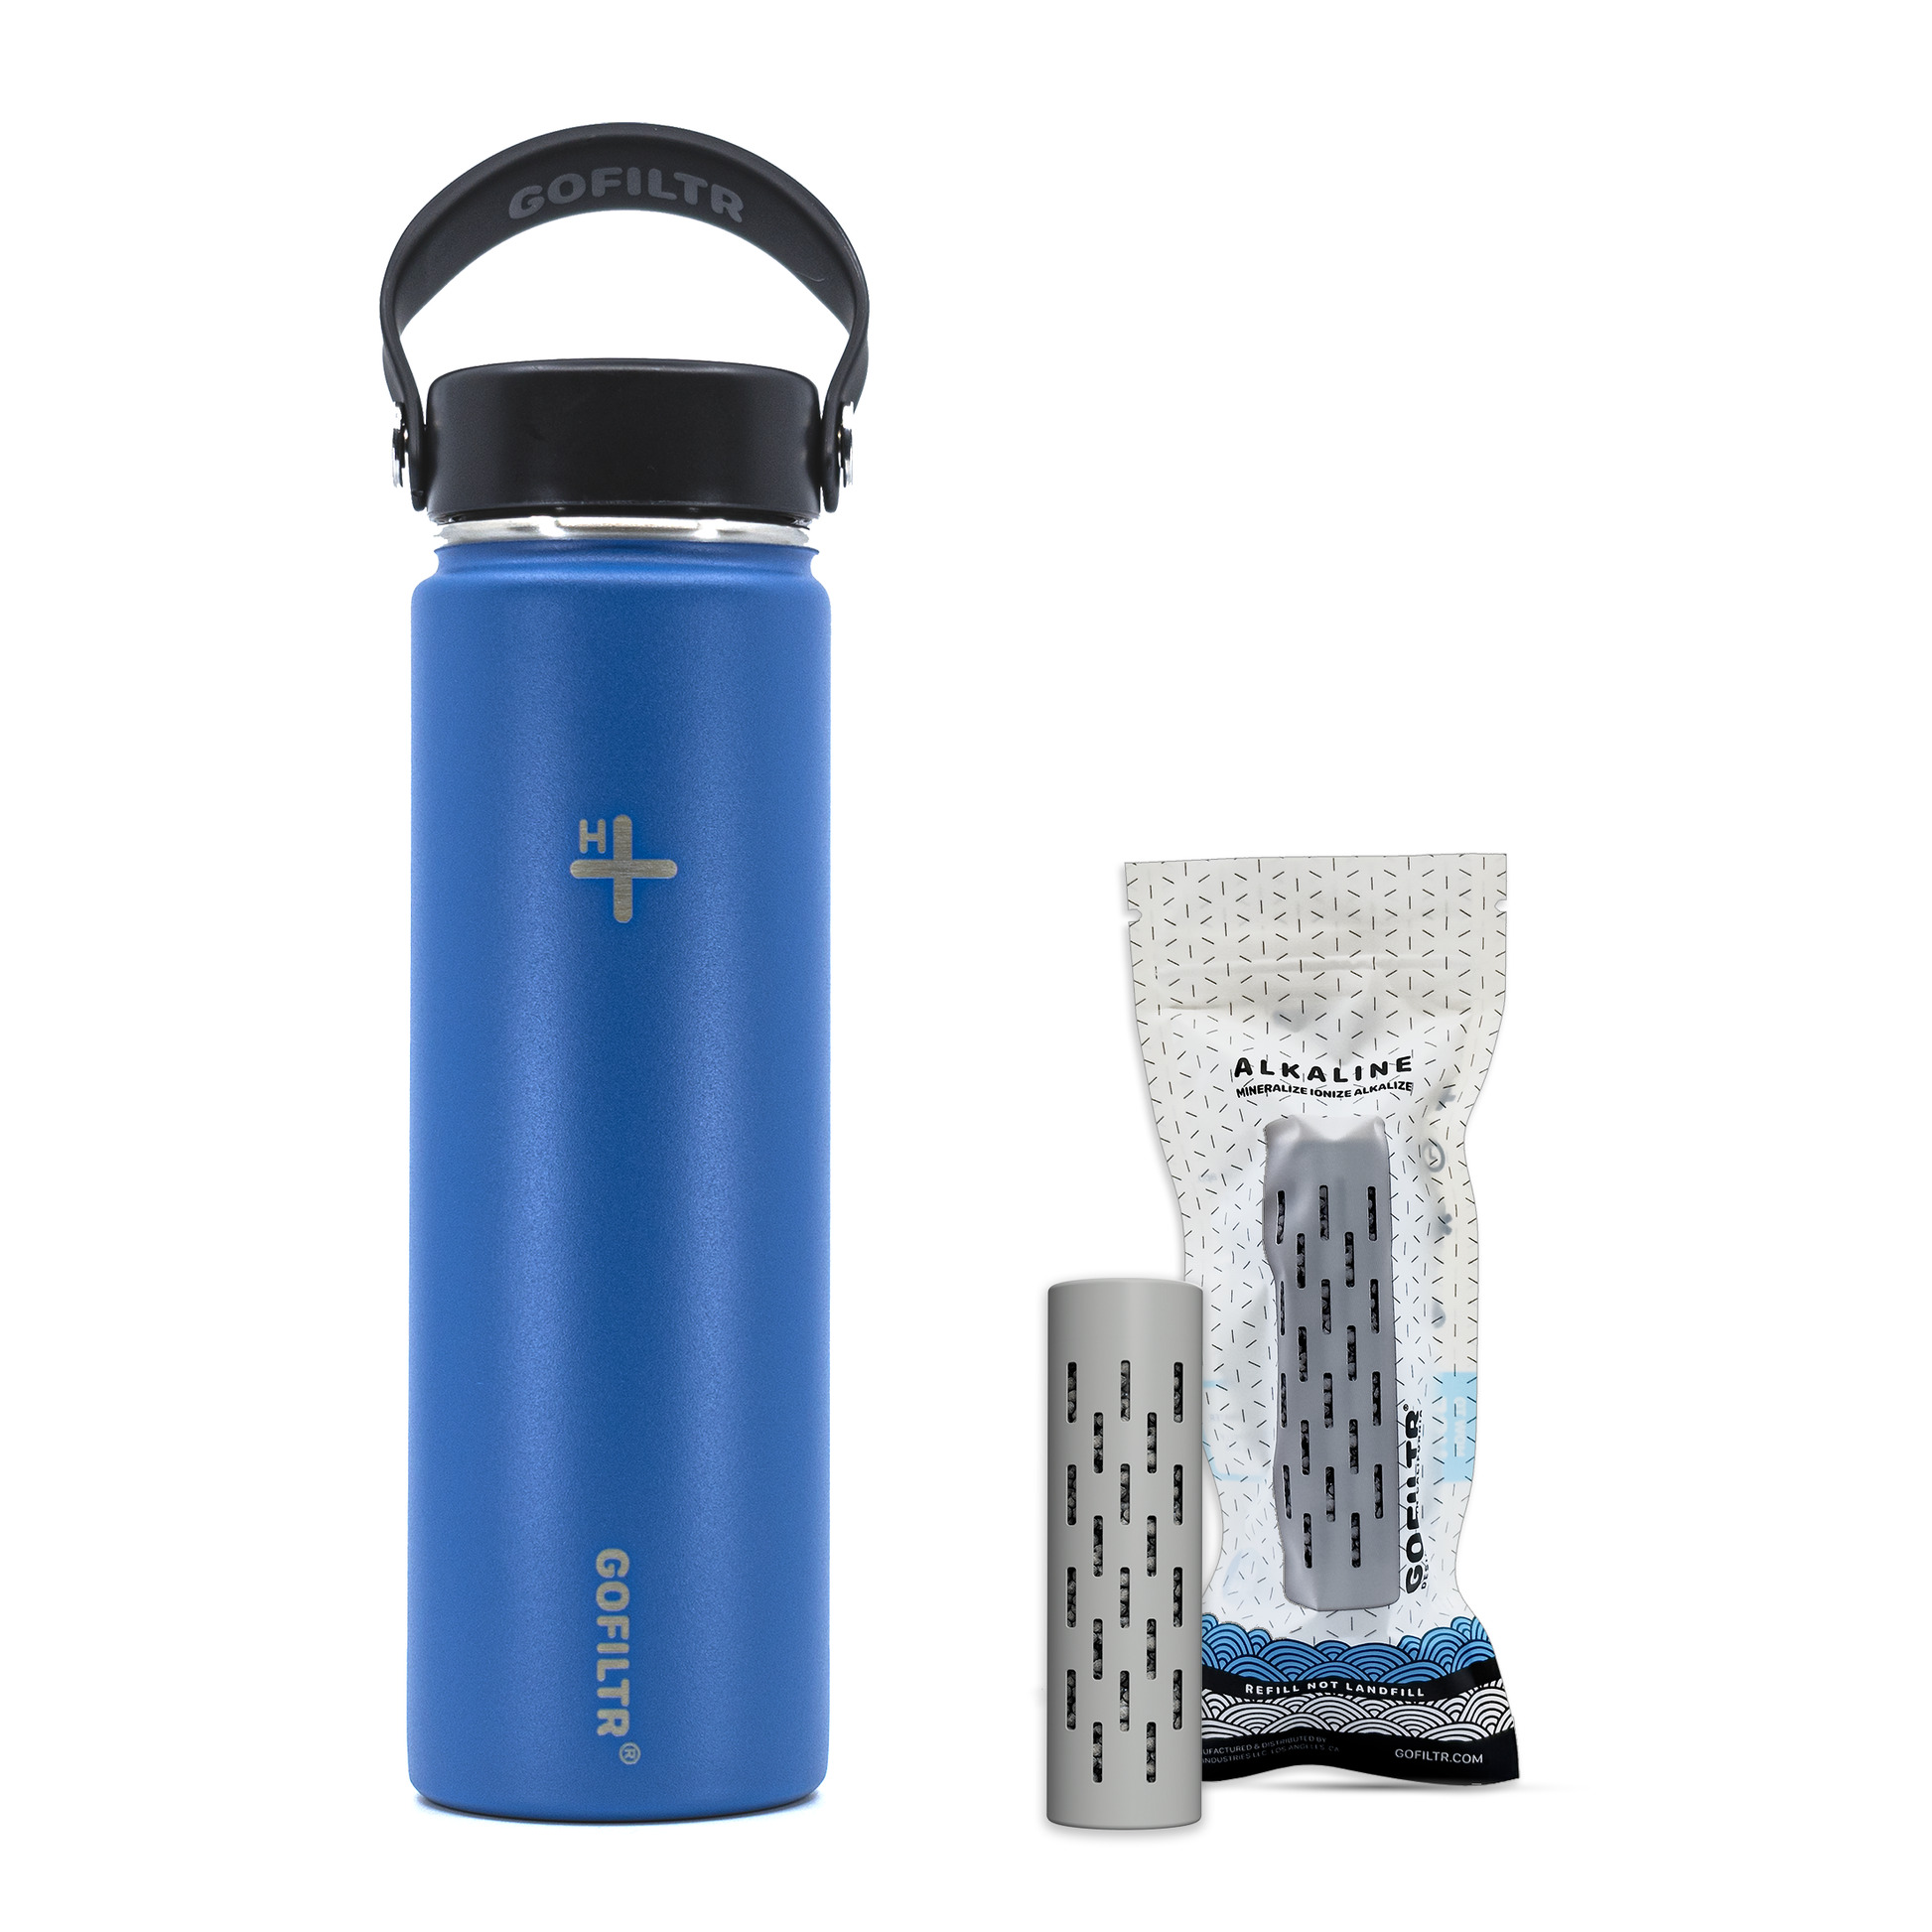 My second day trying to drink more water - 22oz Iron Flask : r